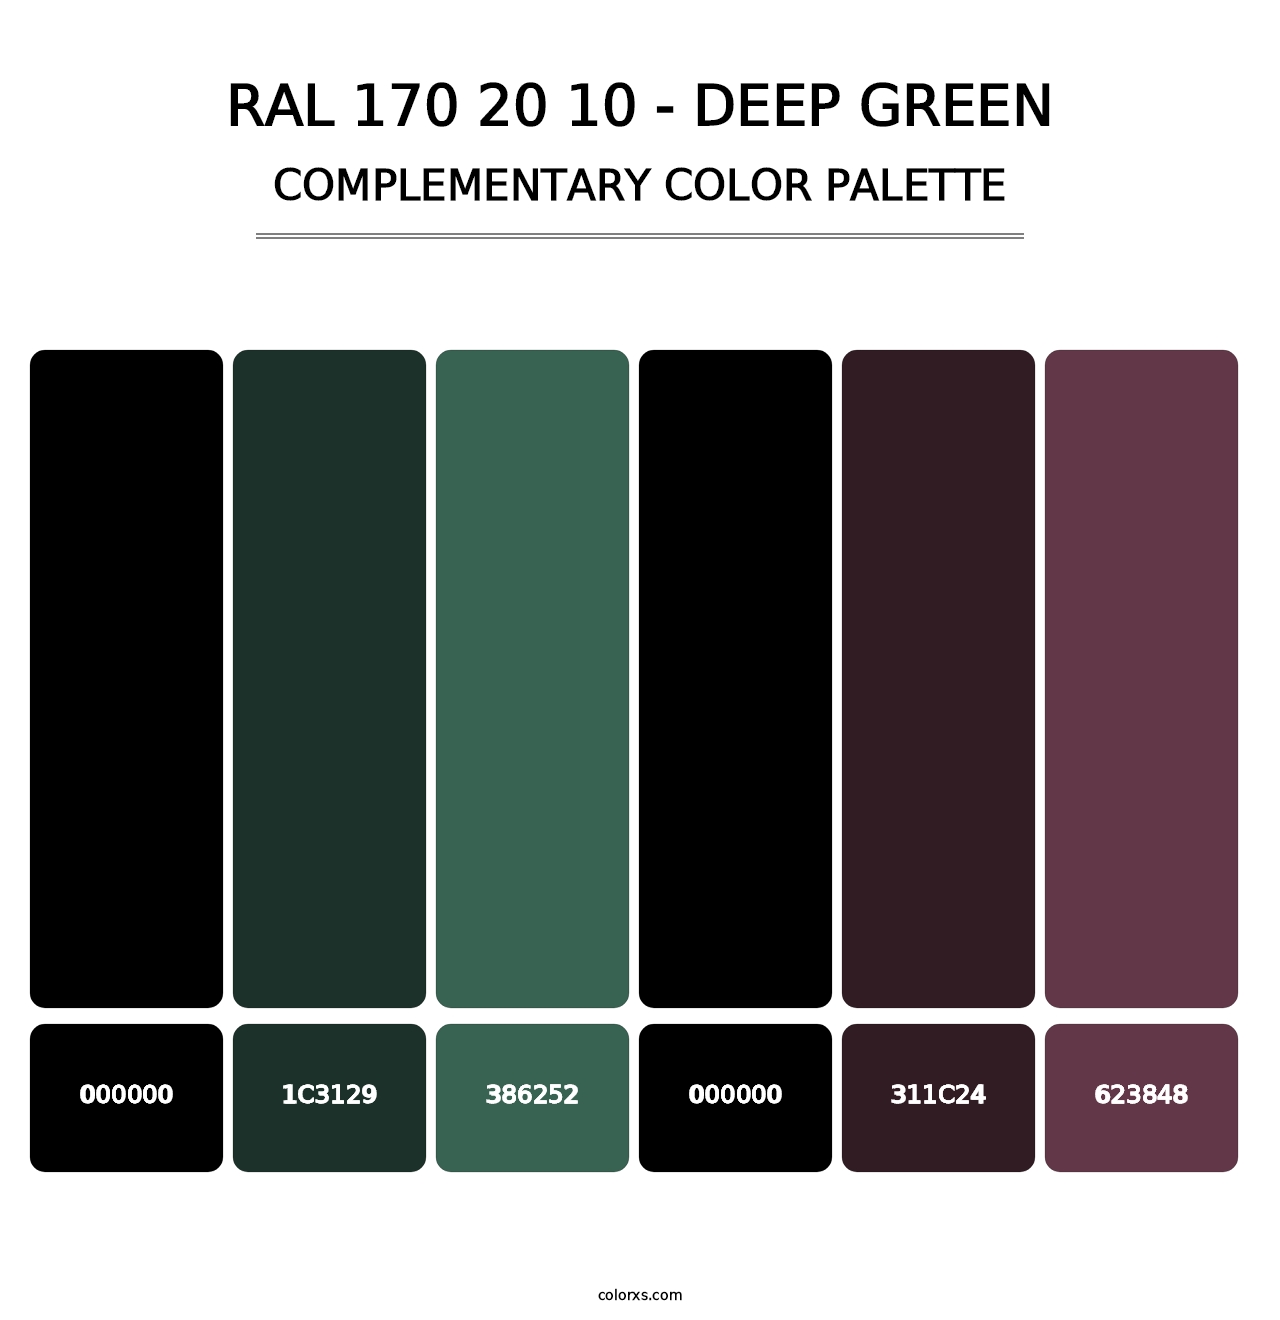 RAL 170 20 10 - Deep Green - Complementary Color Palette